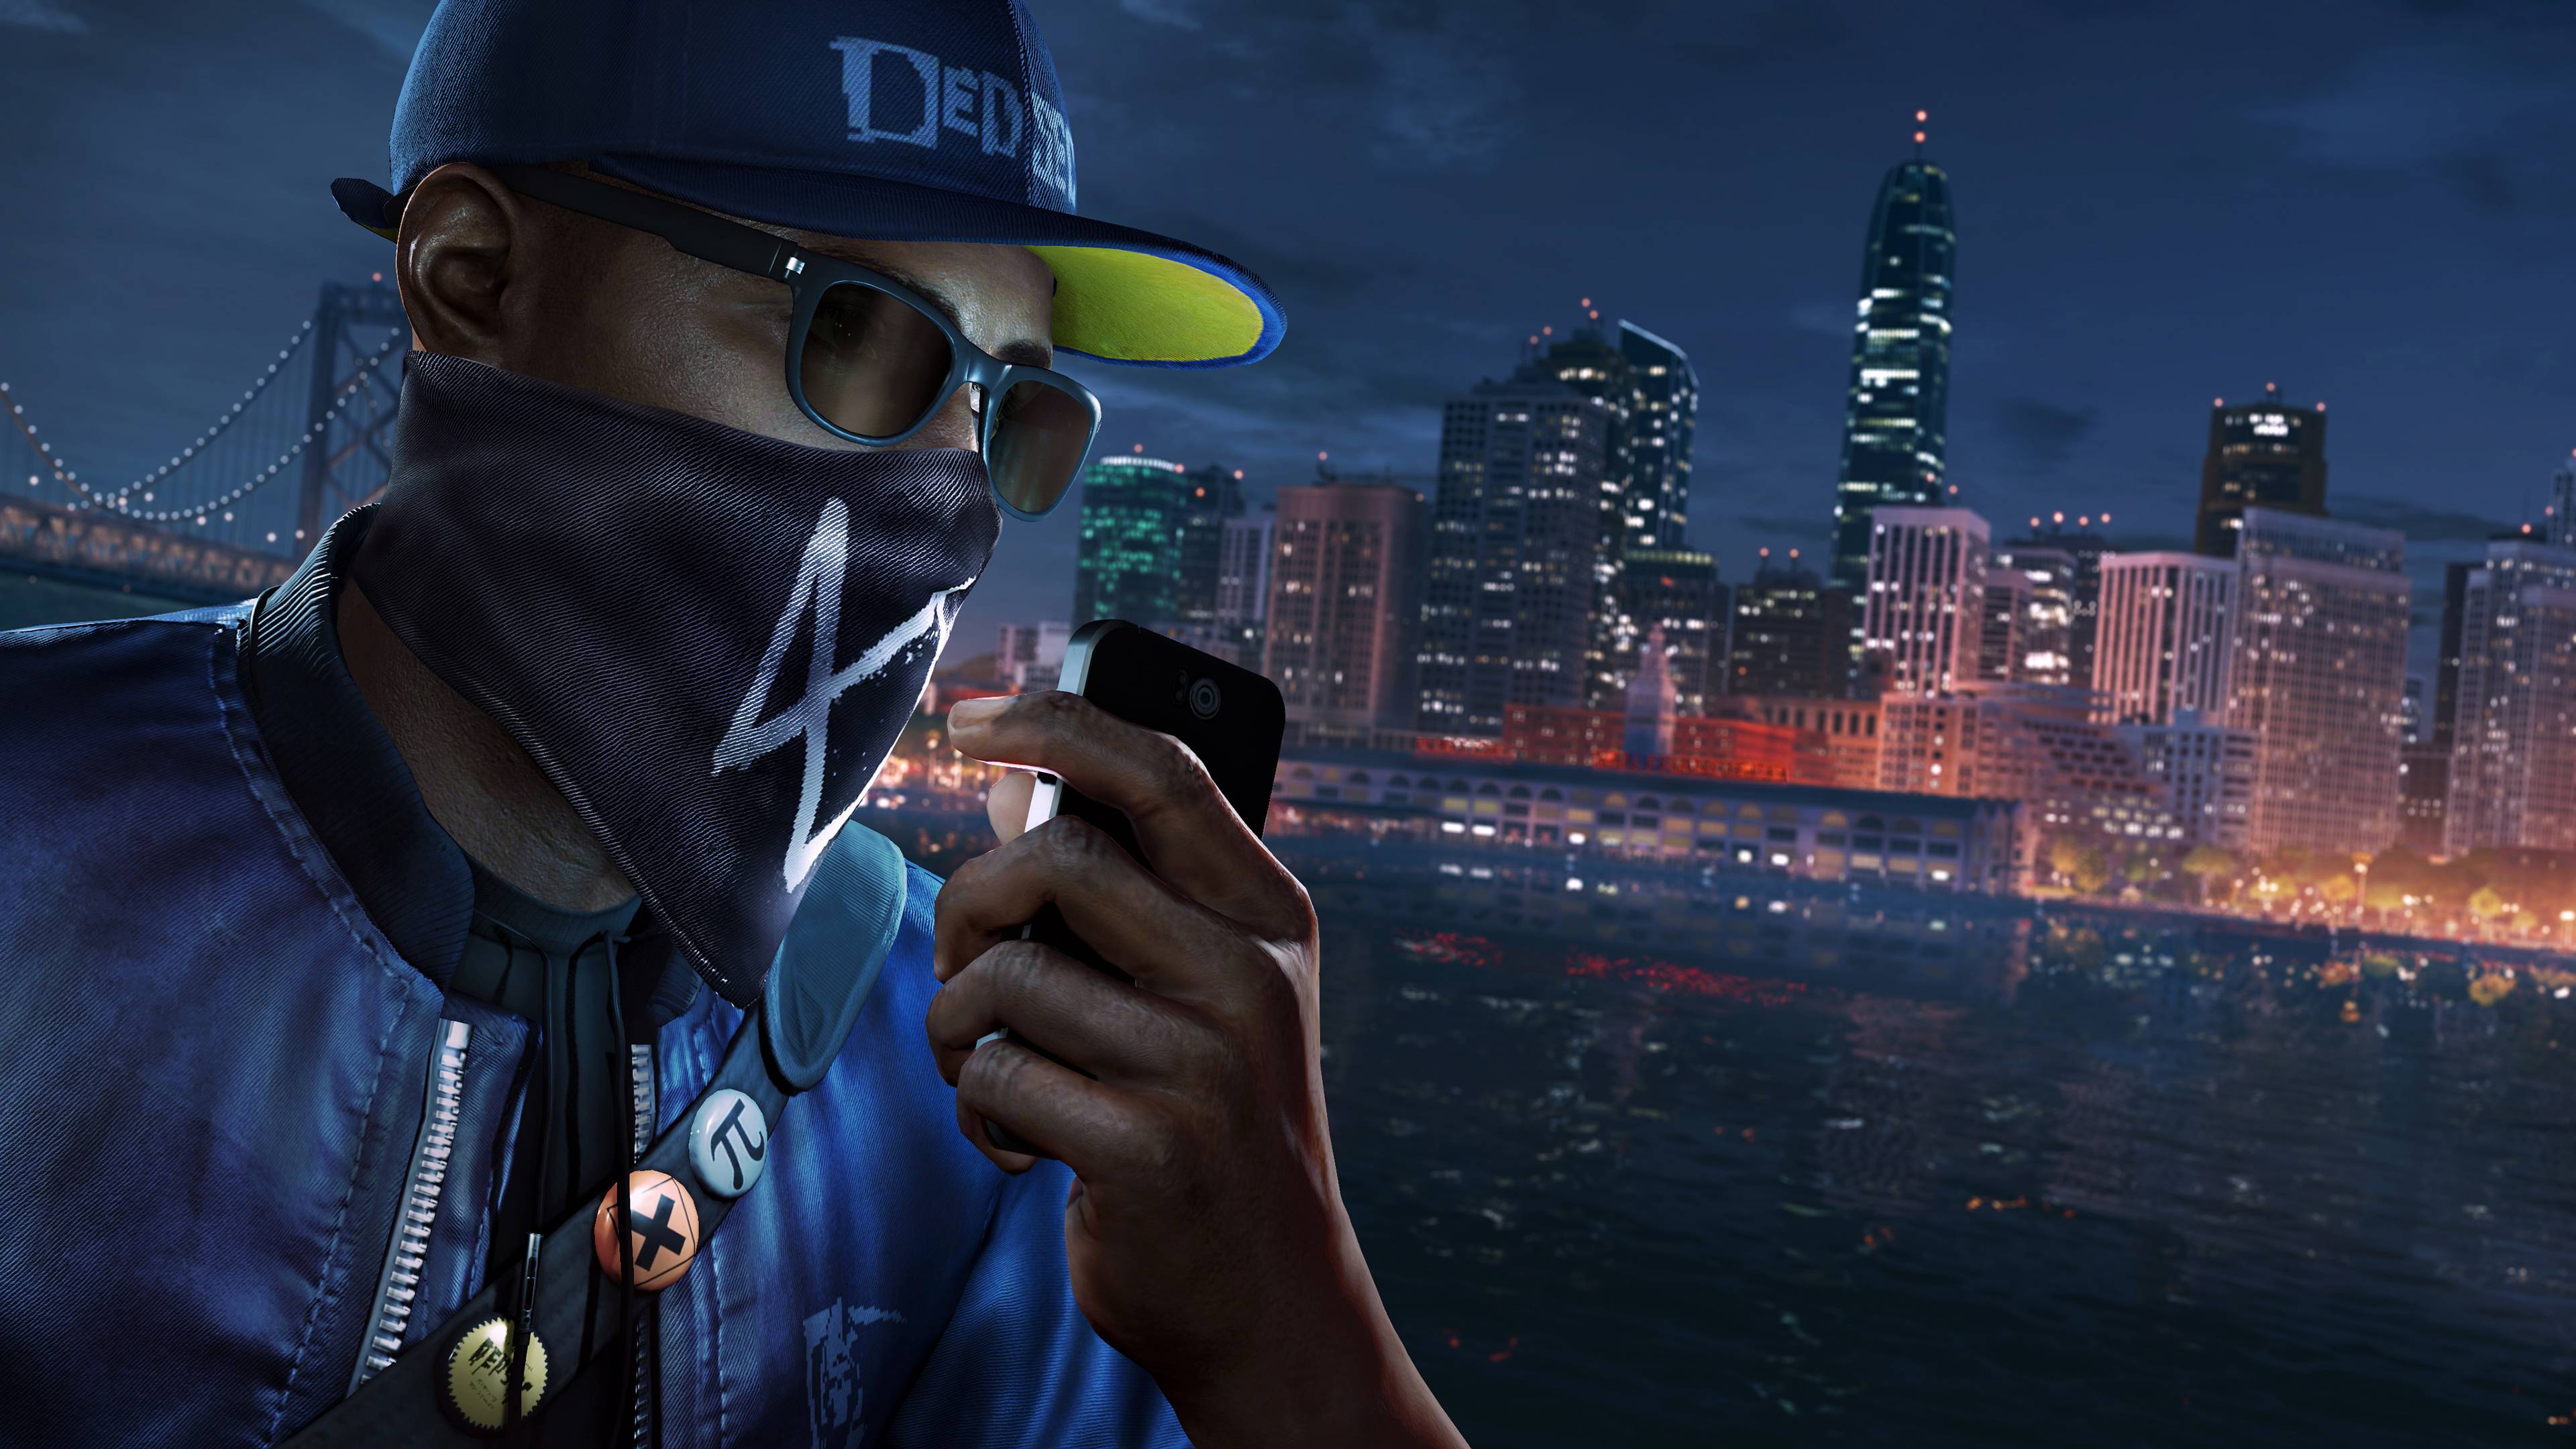 download watch dogs 2 with code